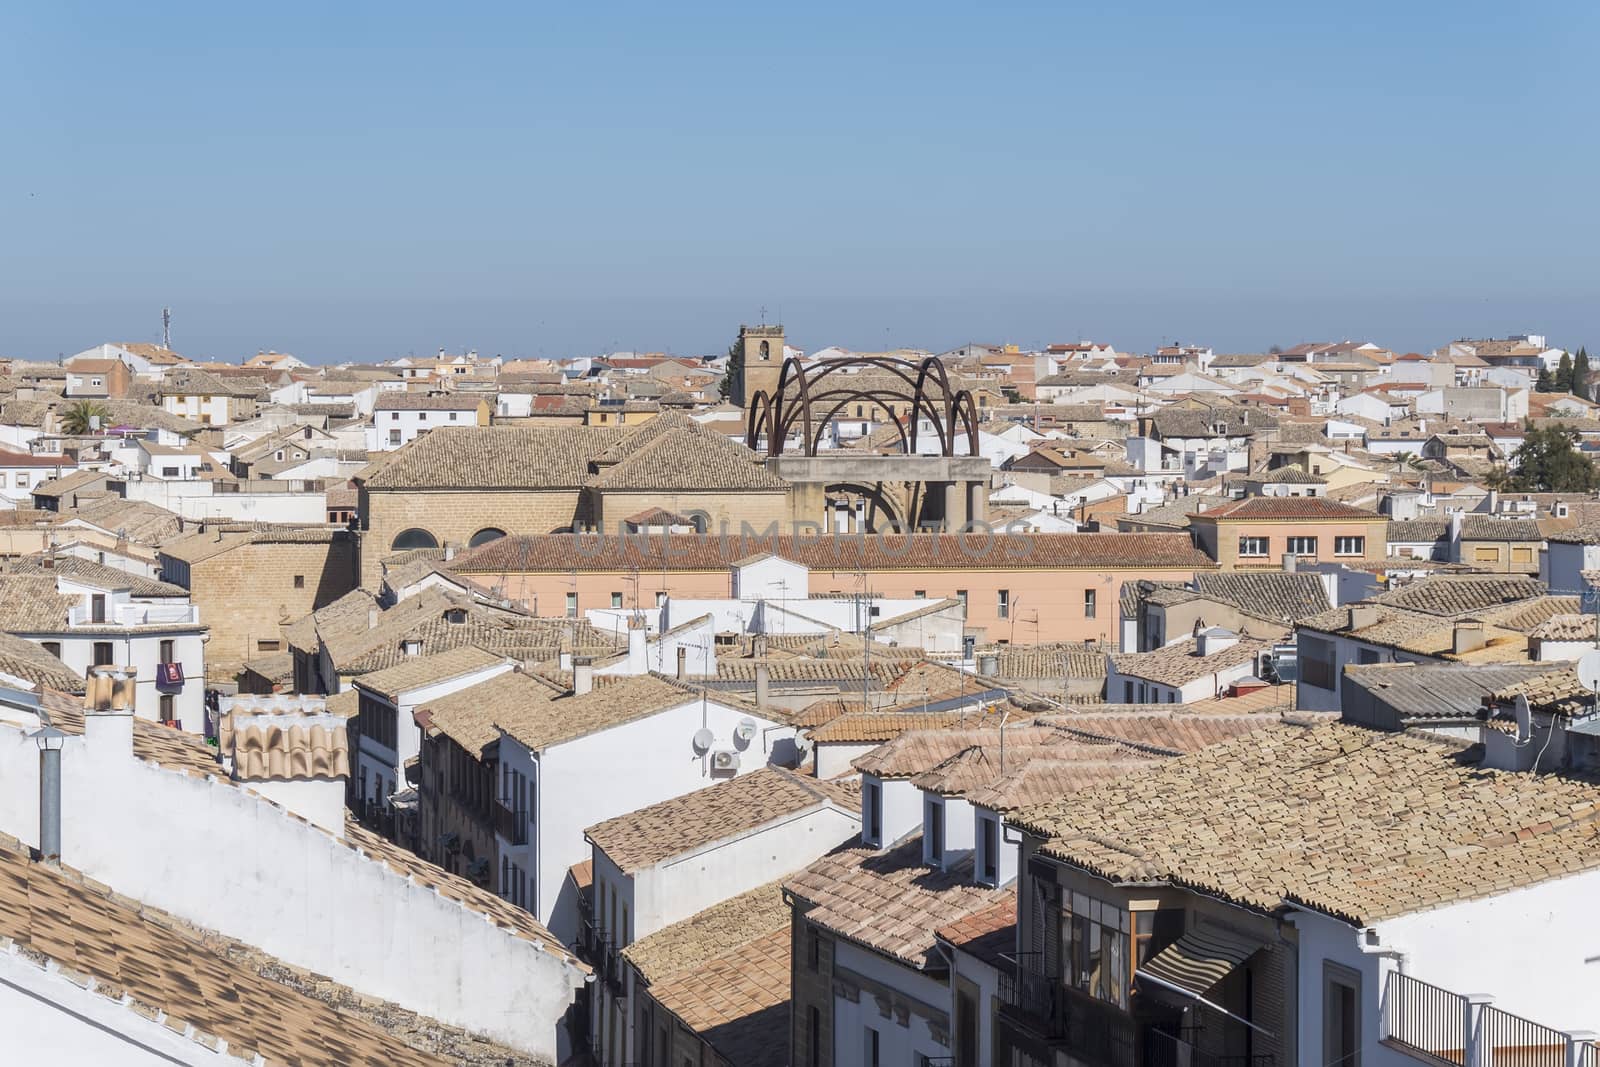 Baeza city (World Heritage Site), San Andres church in the background, Jaen, Spain